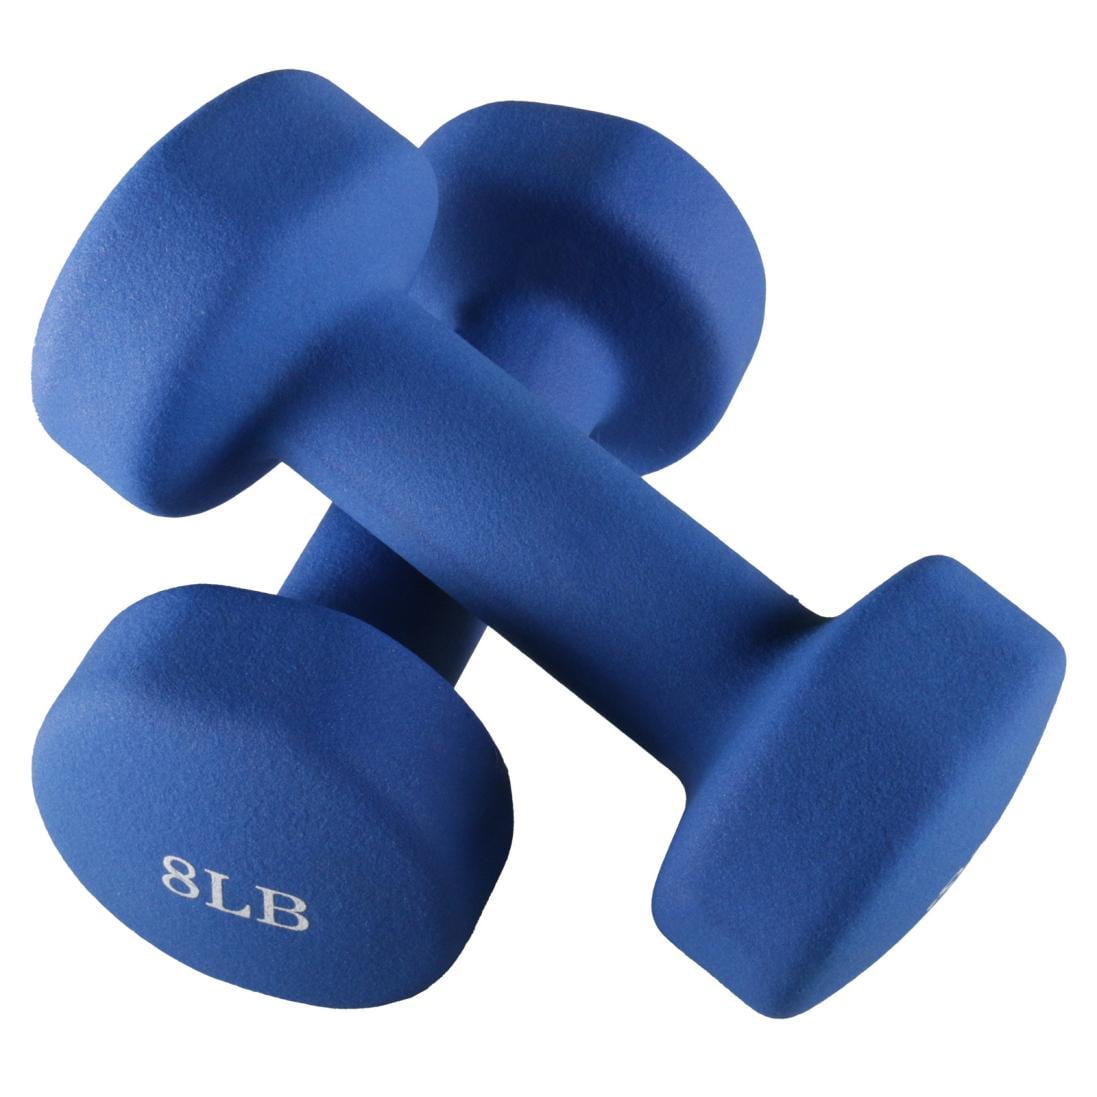 Dumbbell Weights 6/8/10/12/15Lbs Pound Set Barbell Neoprene Coated Weights 2 Set 